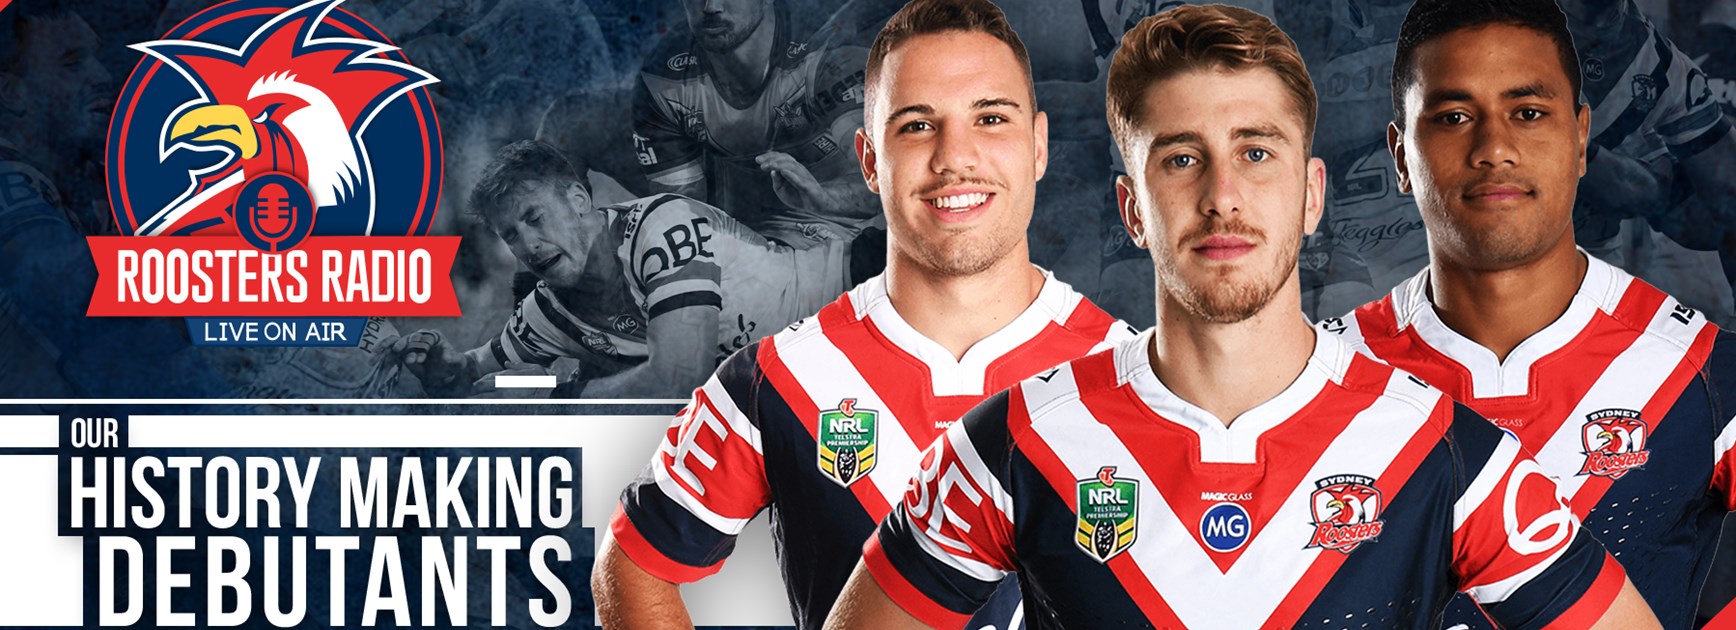 Roosters Radio | The Debutants Reflection